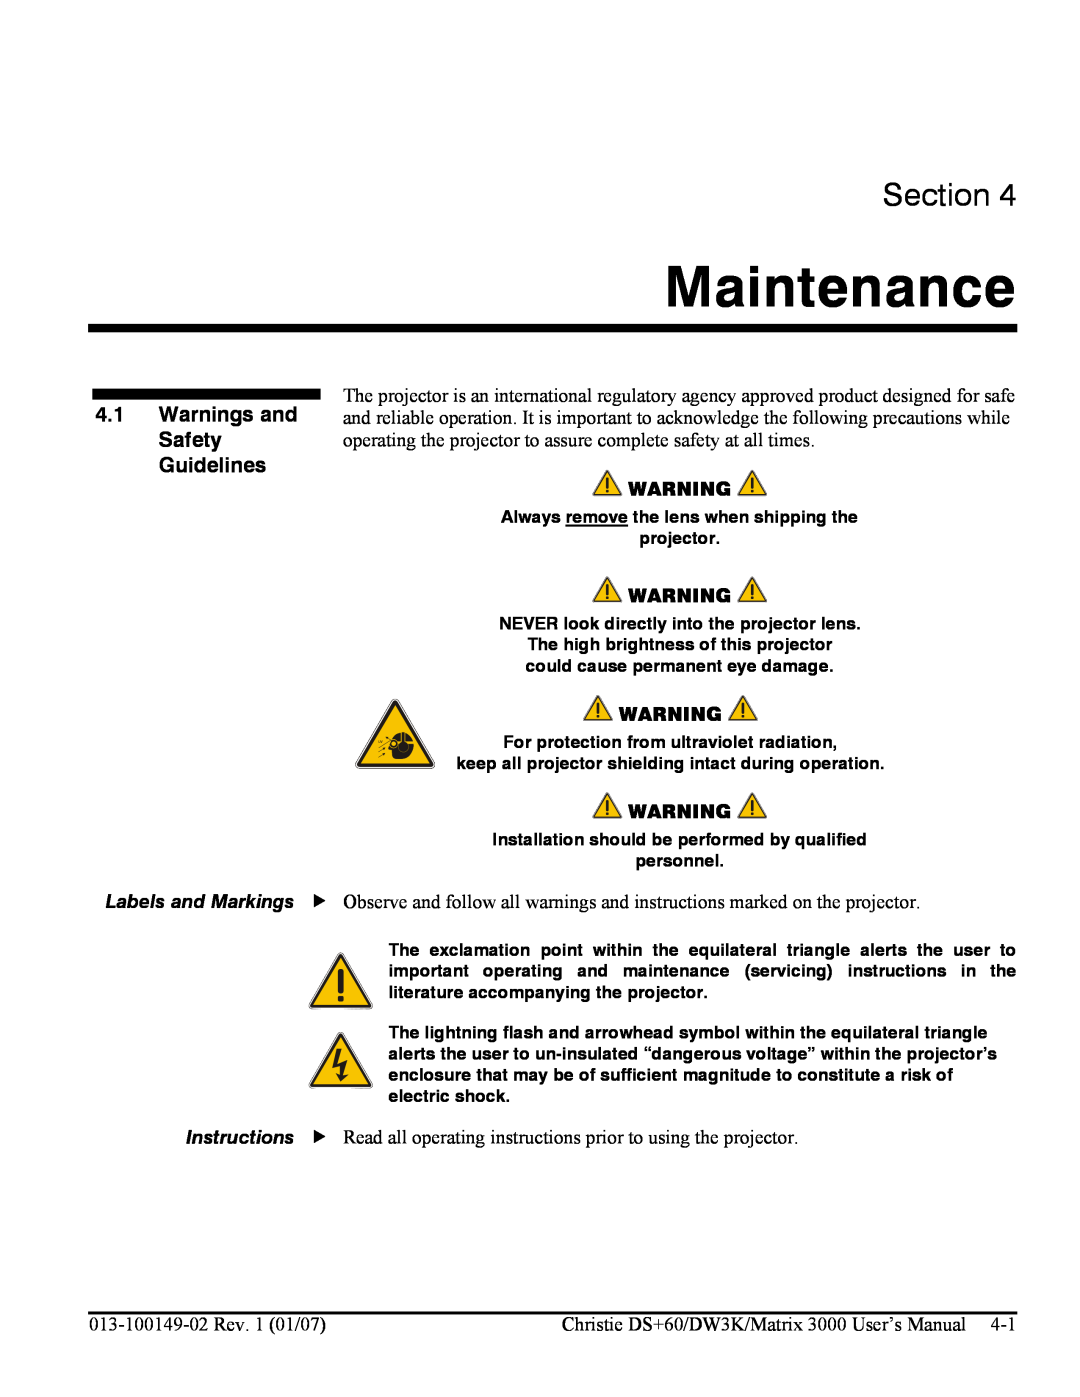 Texas Instruments MATRIX 3000, DW30 user manual Maintenance, Warnings and Safety Guidelines, Section 